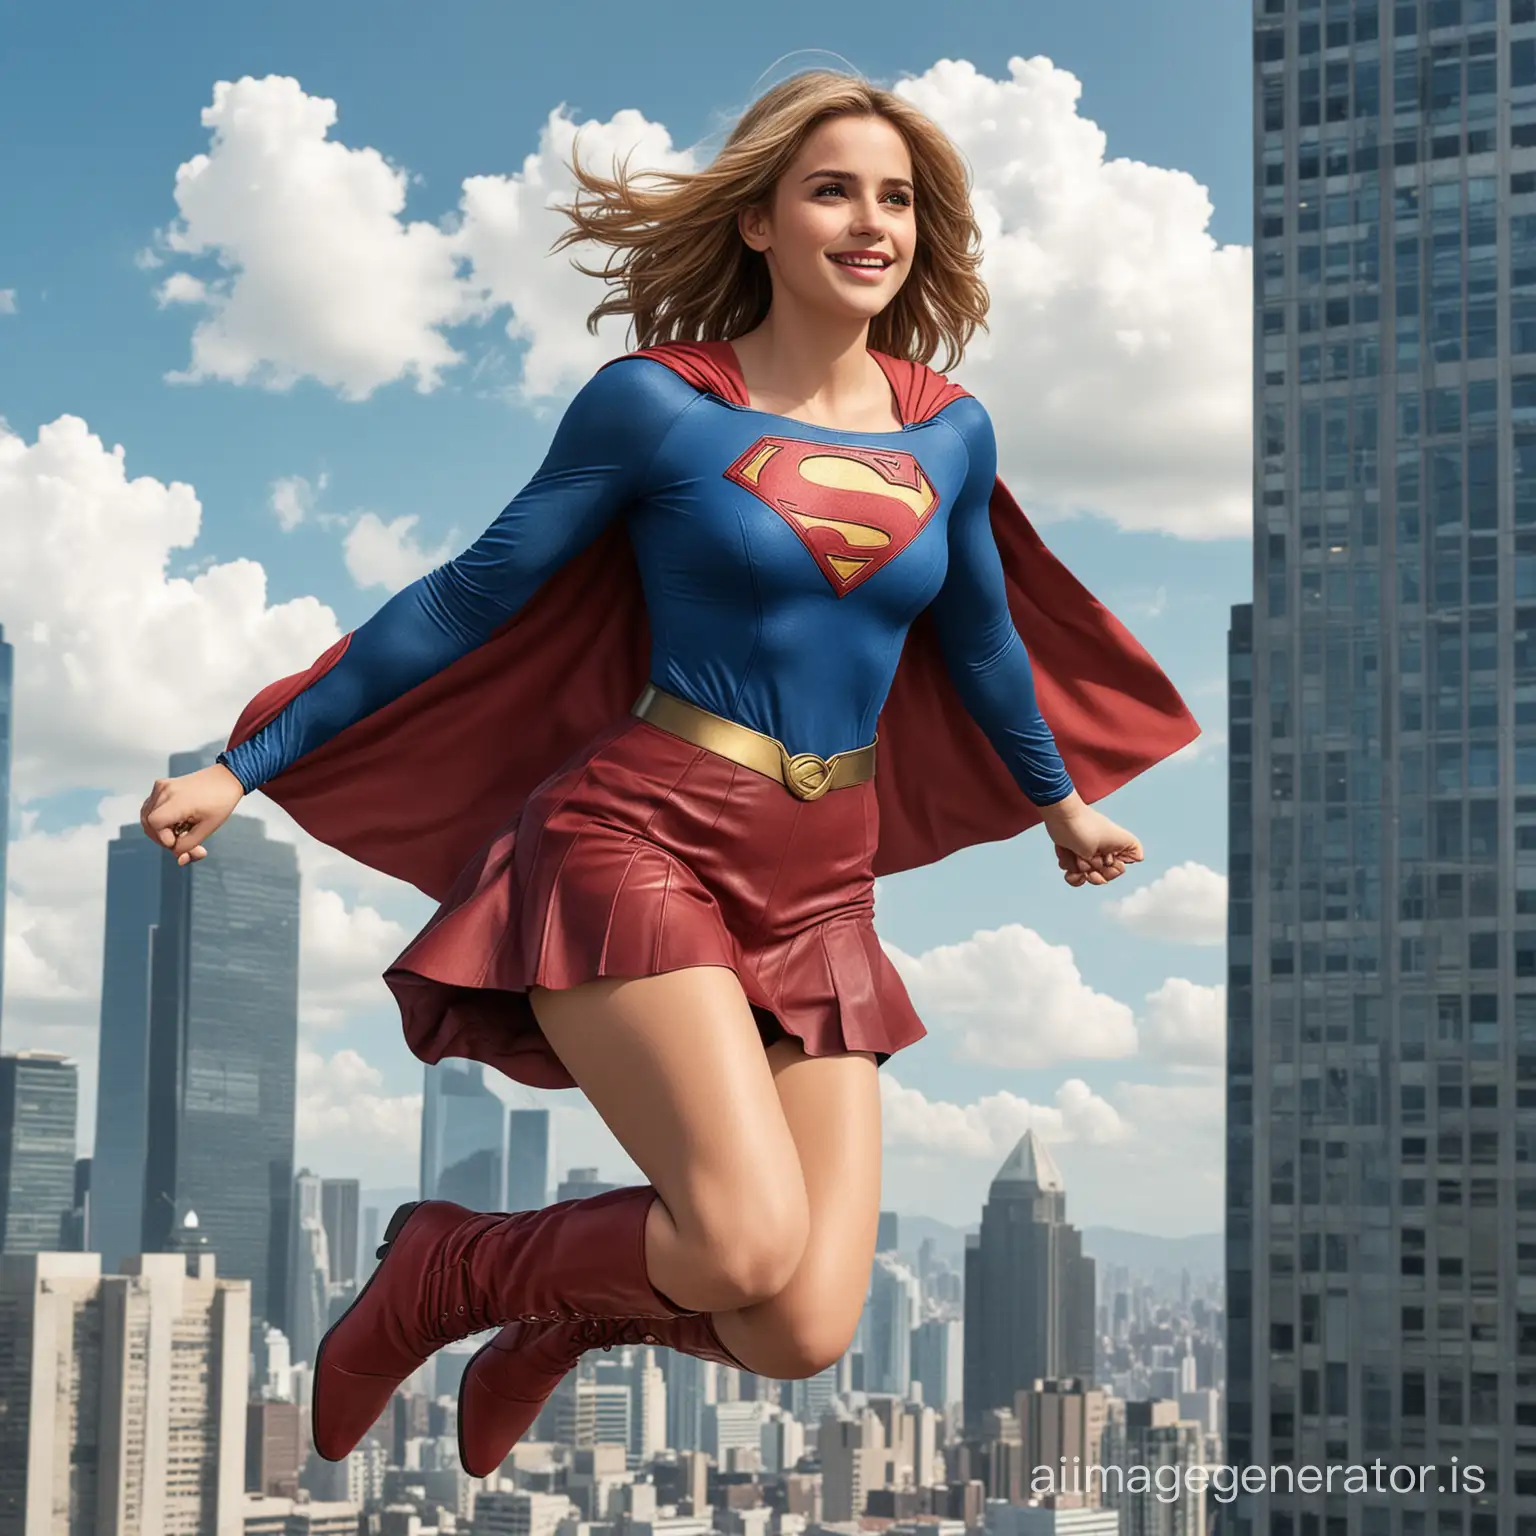 Most happiness-inducing image that includes Supergirl looking at you and her face is perfect because it is a mix between actress Emma Watson and Marcela Mar (colombian actress). Her perfect smile is conveying joy, flirt, eternal love and acceptance for the viewer. She has big breasts, wide hips, slim waist, red boots and skirt, perfect blond hair. She is around 27 years old and she is floating in the air with confidence and in a femenine way. In the background there are skyscrappers, a blue sky, and white clouds in anime style. The image is in the style of modern realistic DC comics.